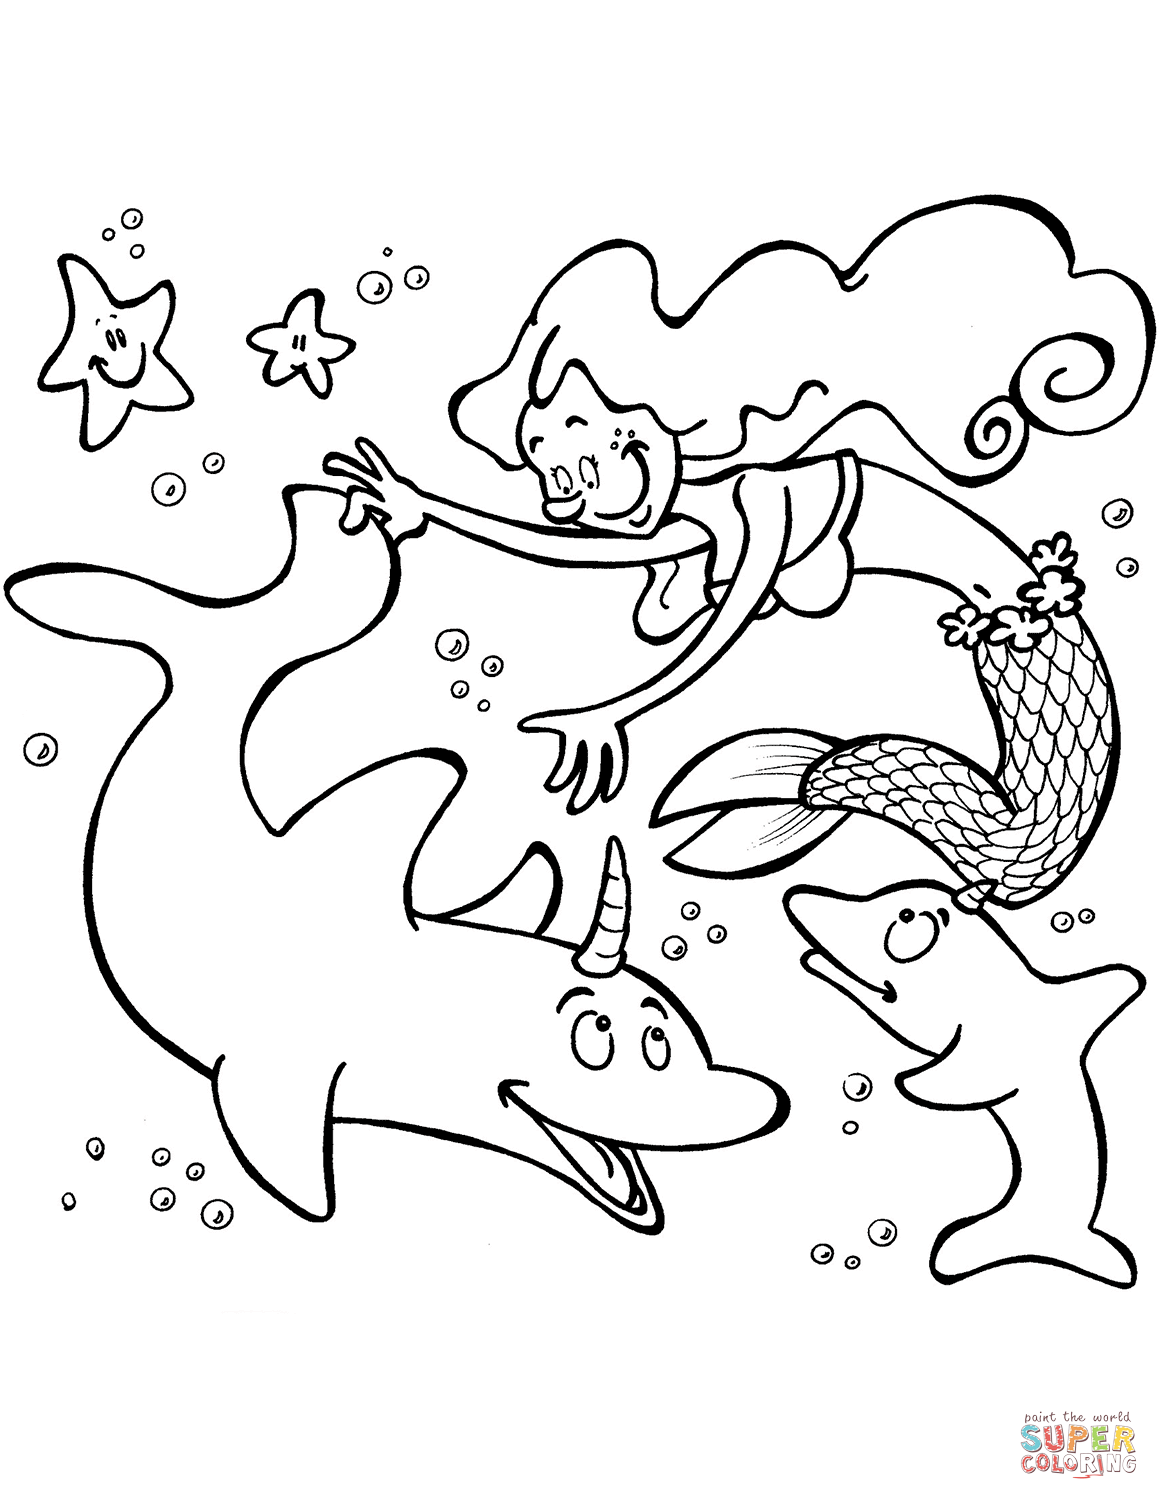 Mermaid with Unicorn Dolphins coloring page | Free Printable Coloring Pages